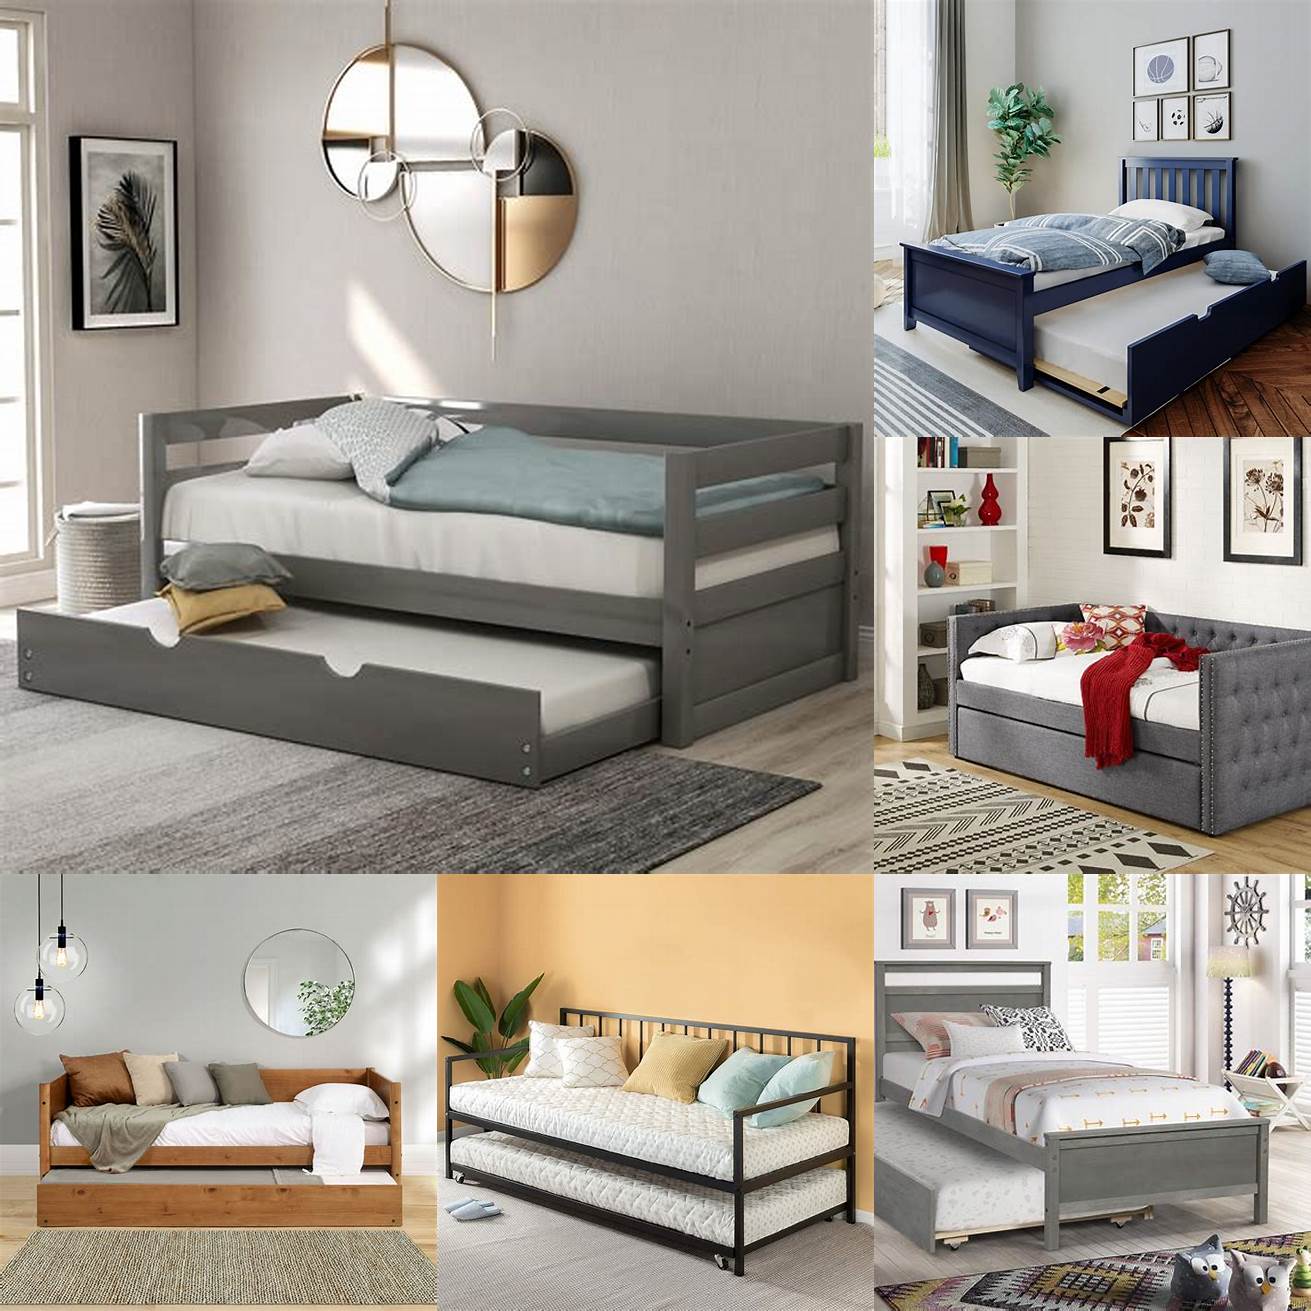 Twin beds with trundle can complement various room styles such as modern or minimalist